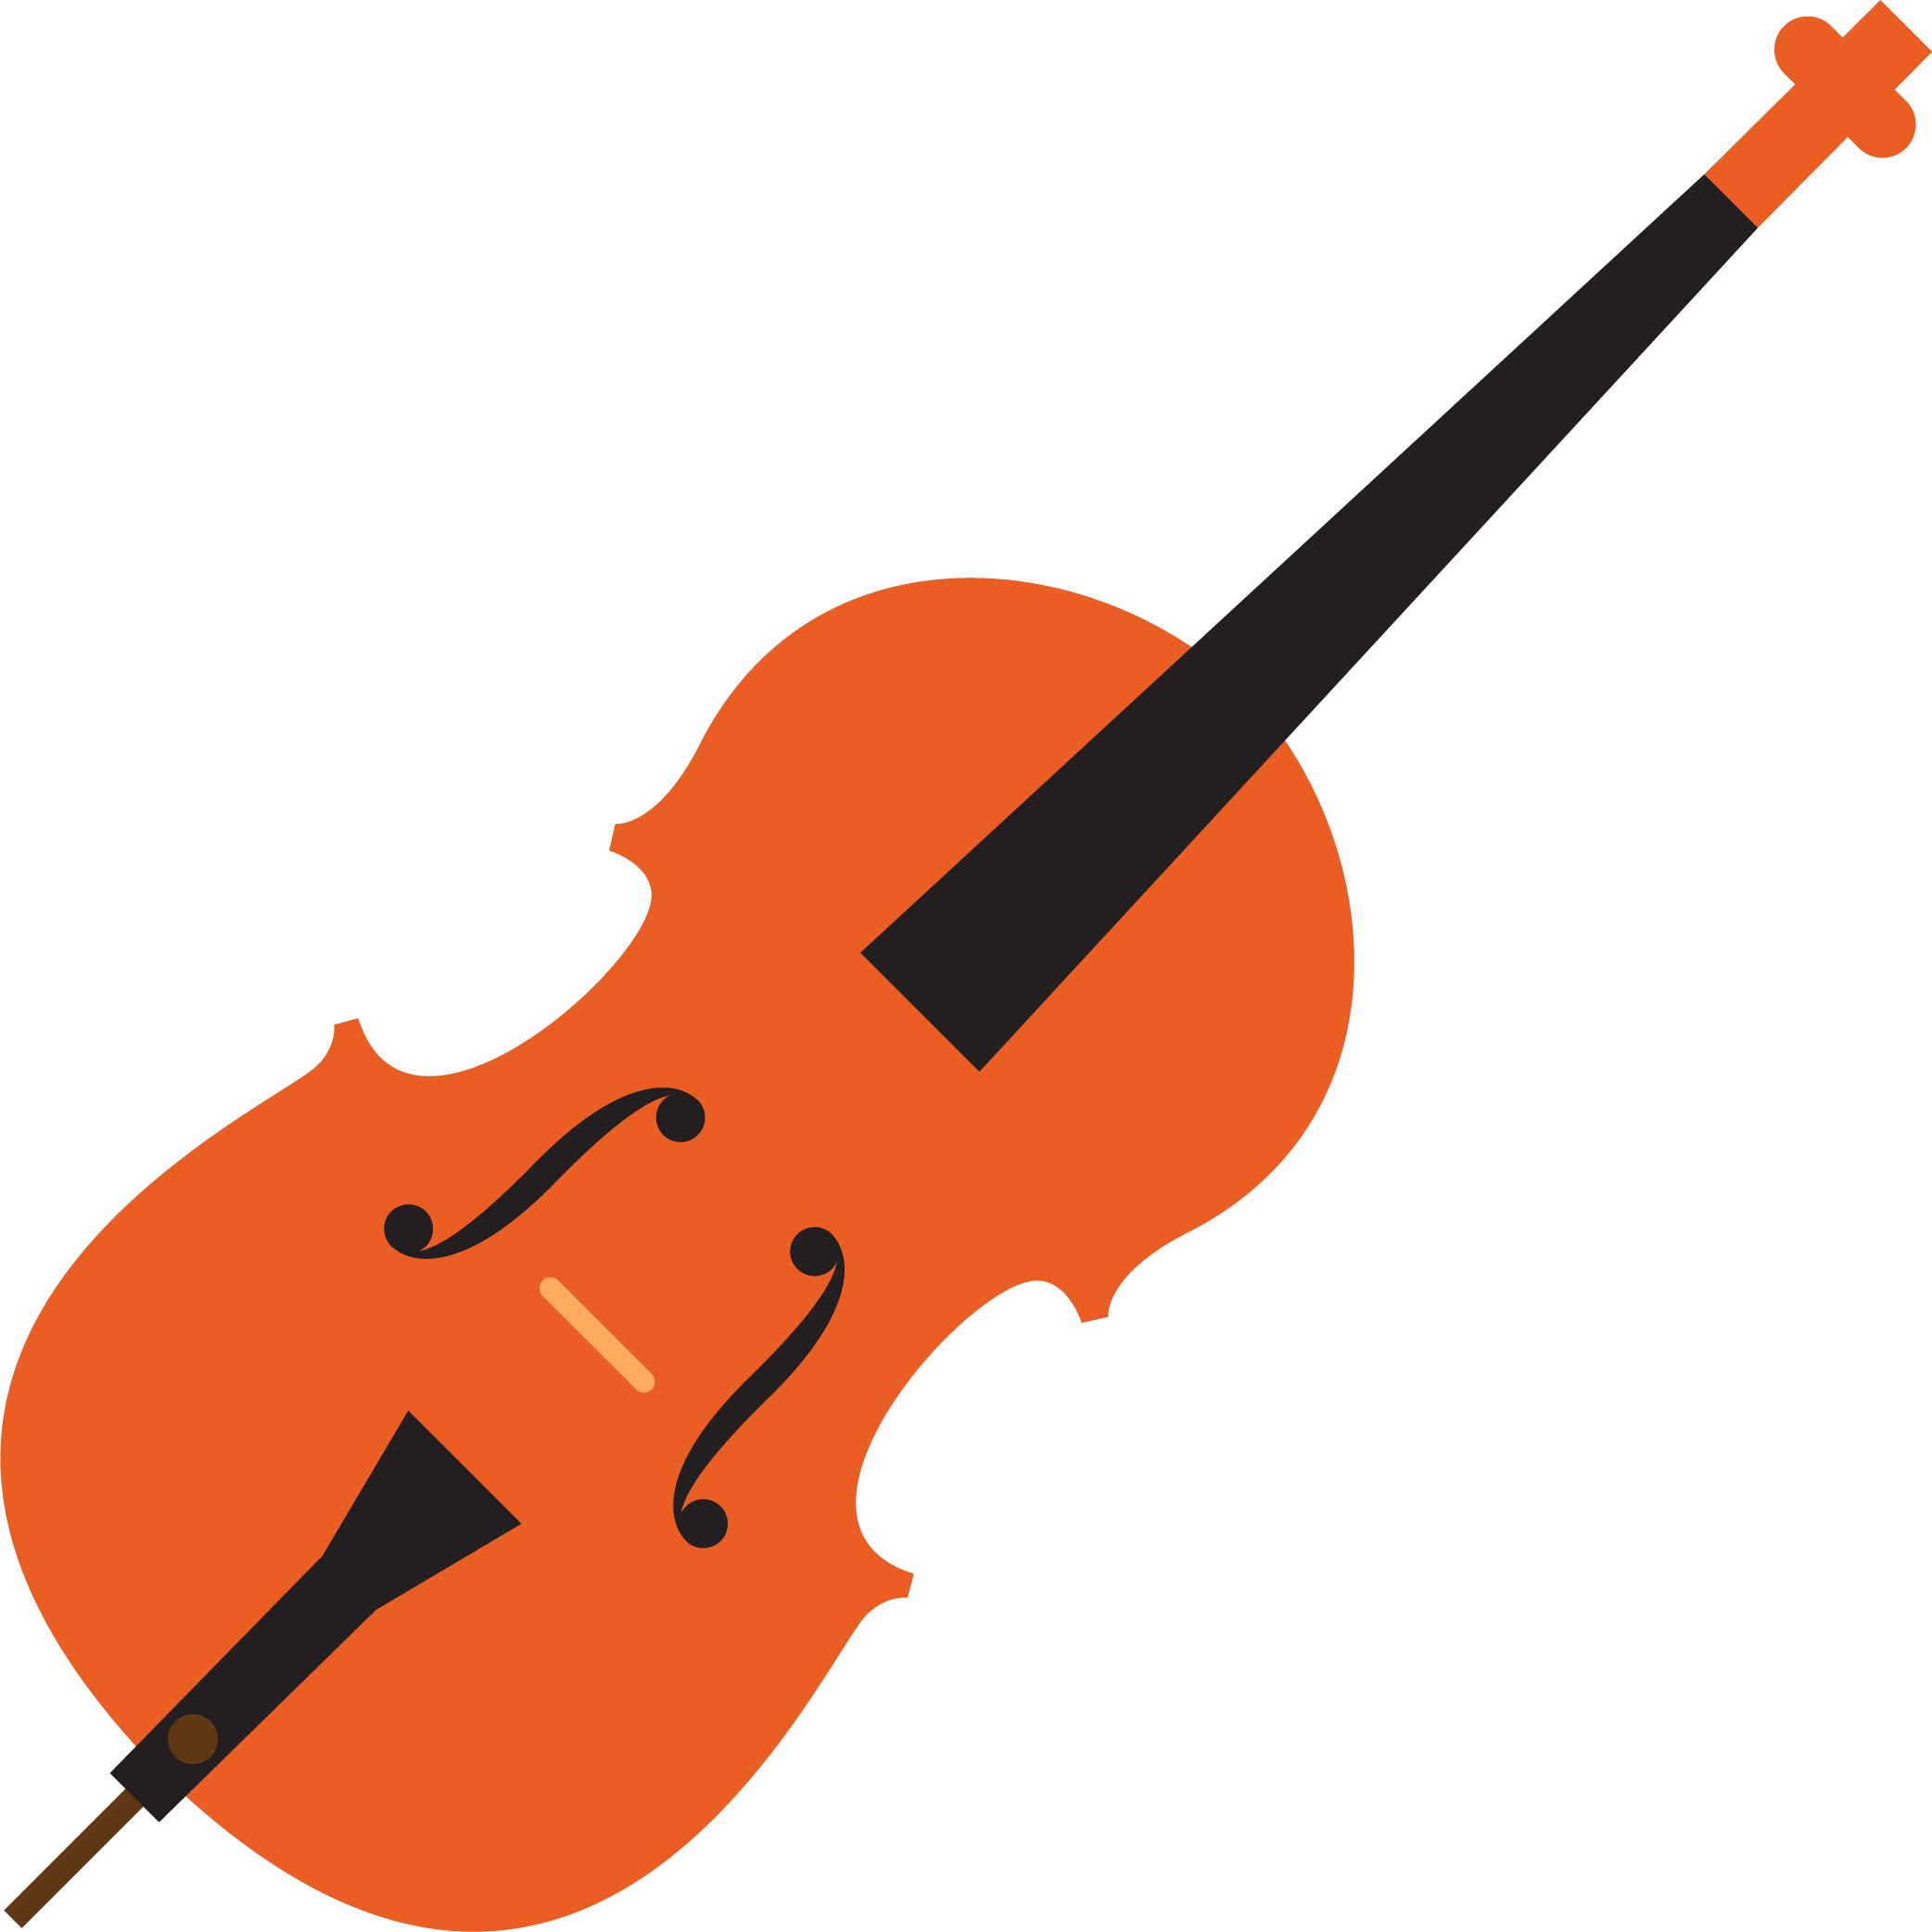 cello lessons and classes online